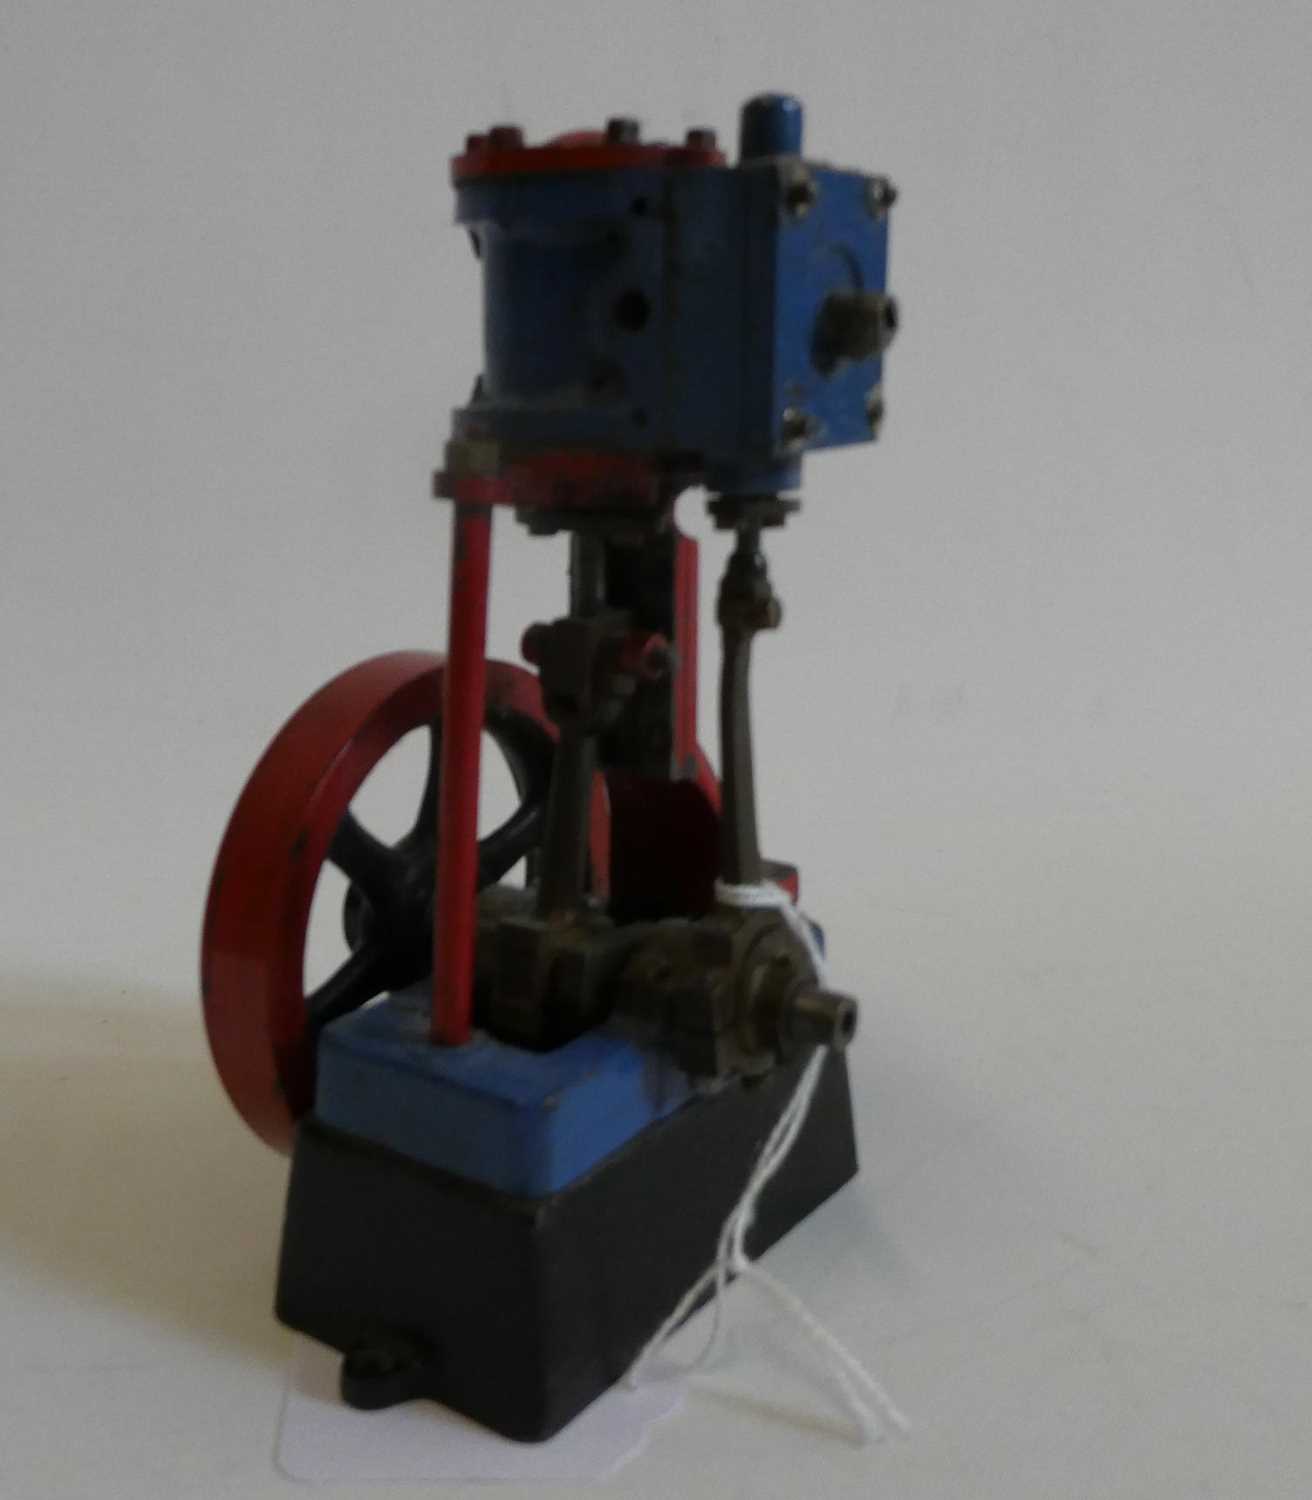 Single cylinder non-reversing vertical steam engine (would benefit from some refurbishment), fair